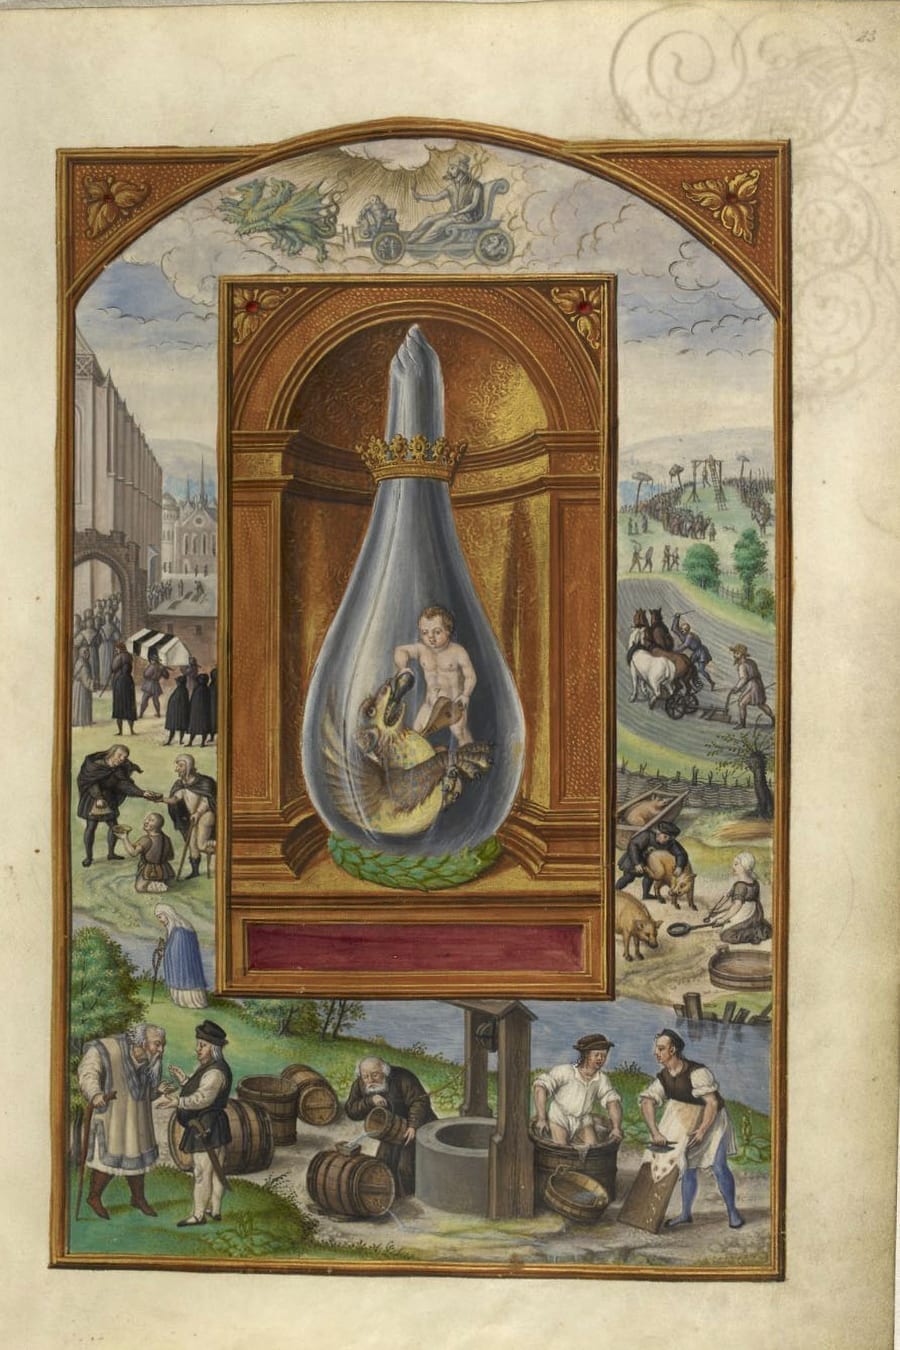 Illustration of scenes of daily life from the Alchemical manuscript Splendor Solis